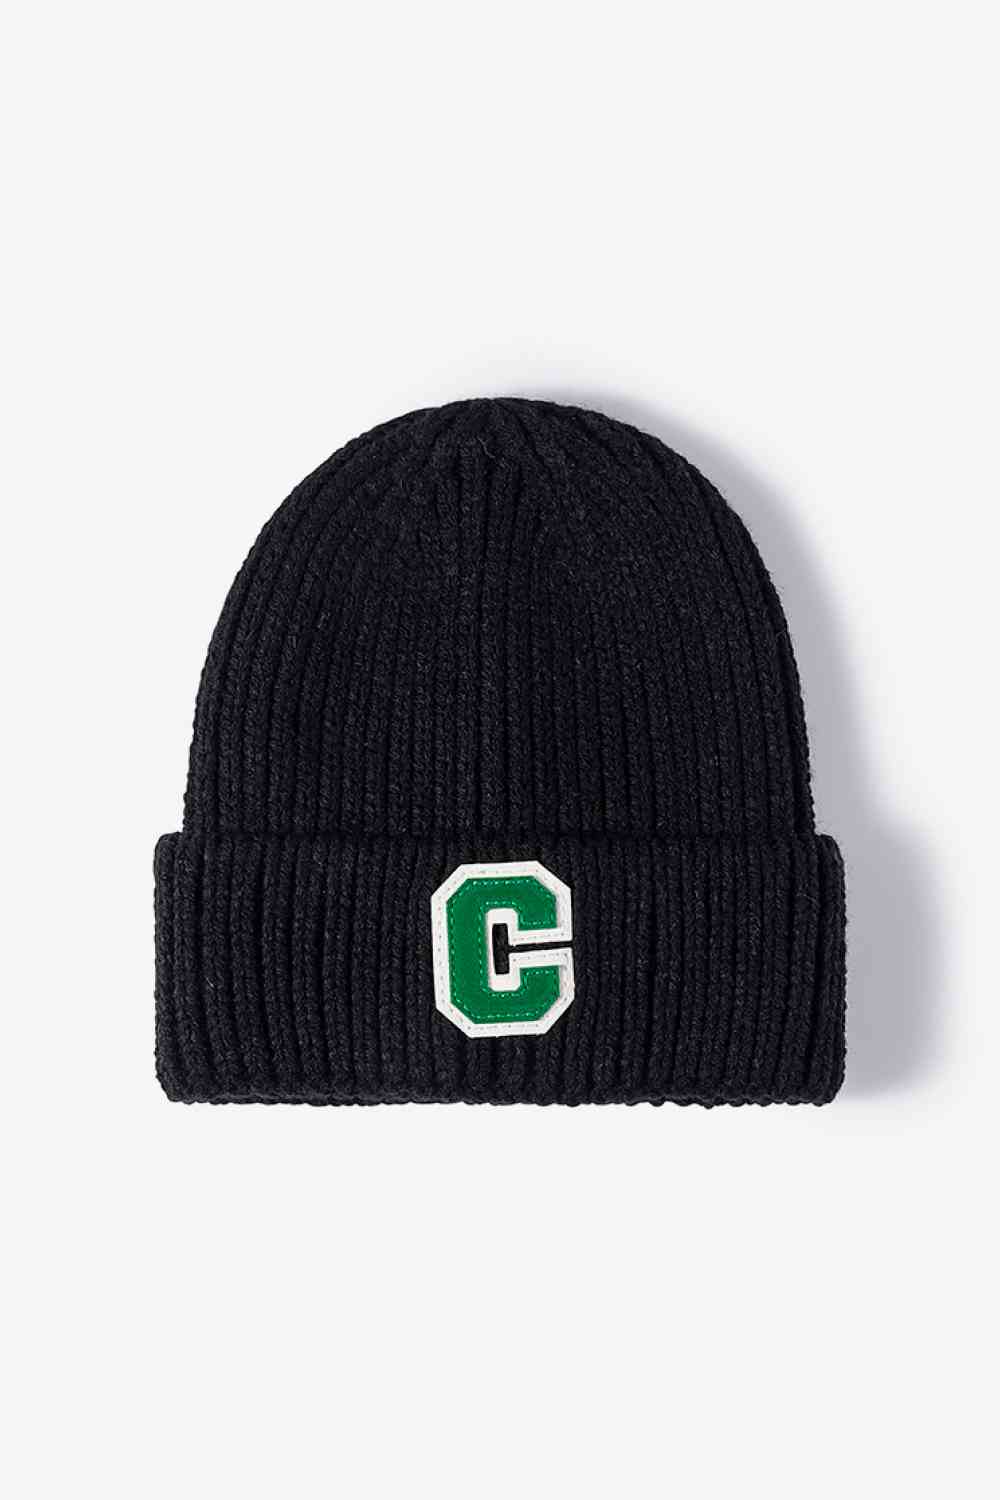 Letter C Patch Cuffed Beanie Black One Size